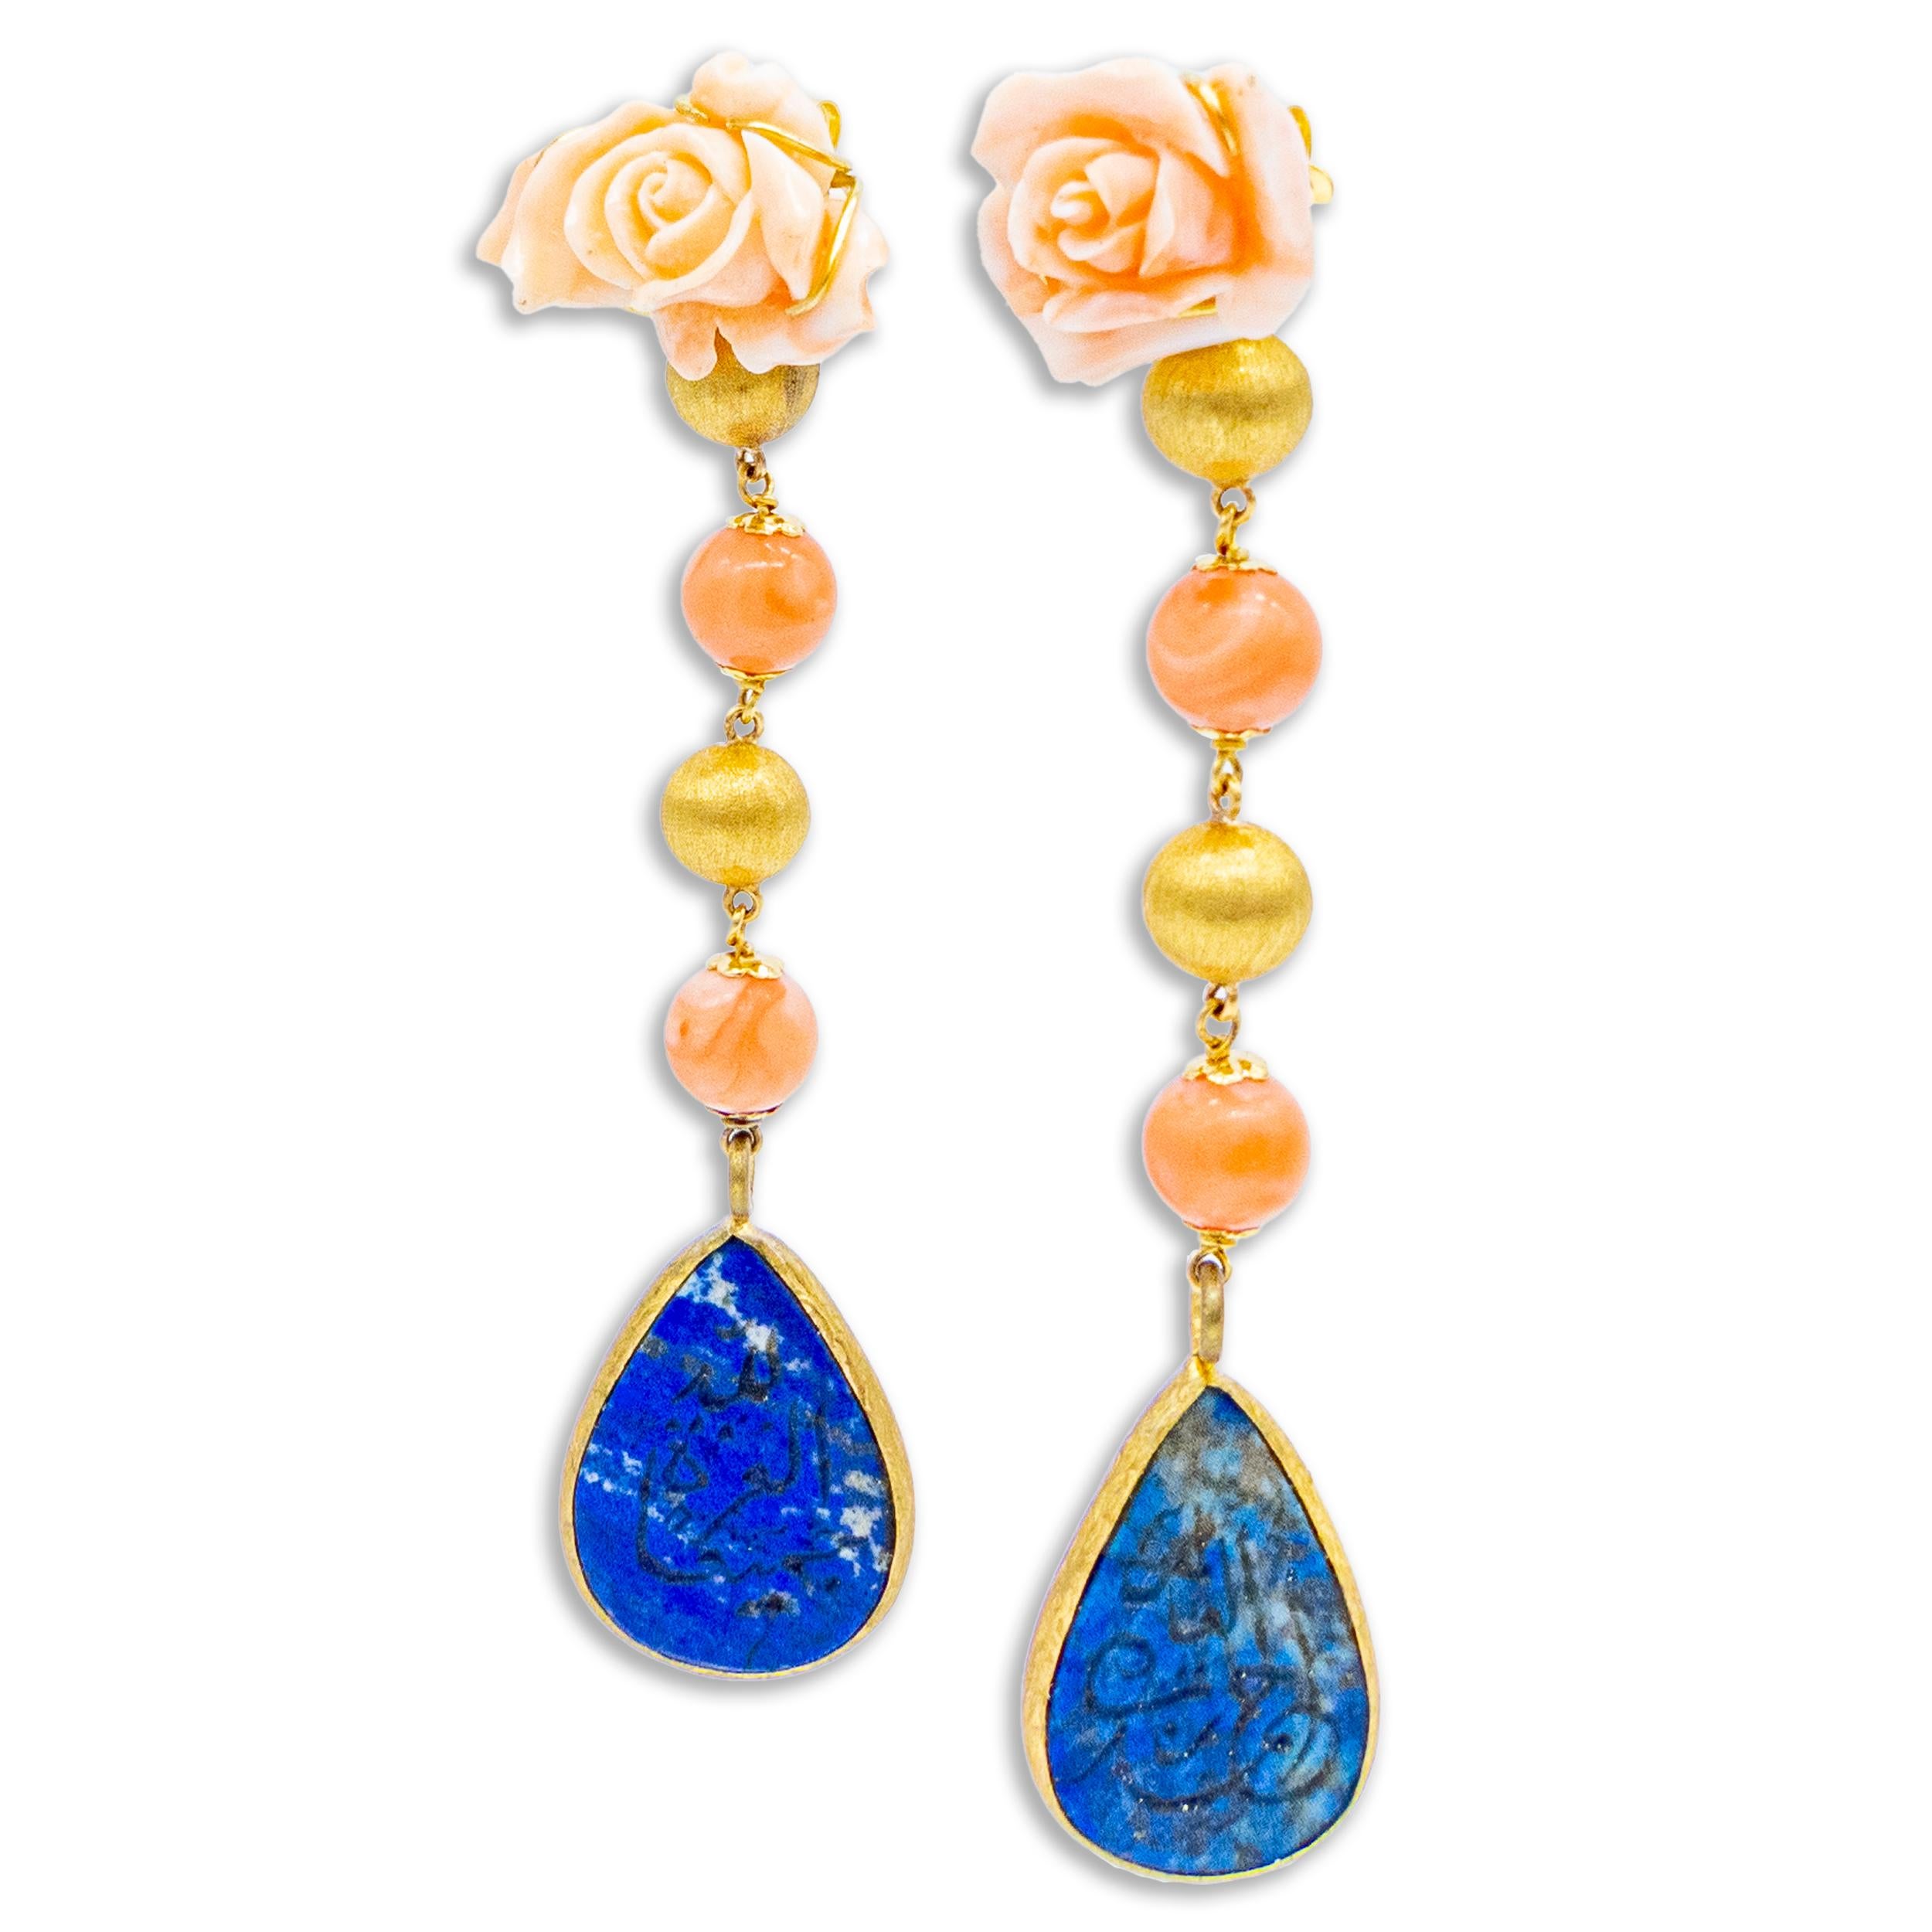 21st Century 18 Karat Gold Earrings Coral Roses Lapis Lazuli Arabic Calligraphy

18 Karat yellow gold earrings, angel skin coral carved in the shape of a rose, angel skin coral beads and antique piece of lapis lazuli with Arabic calligraphy covered